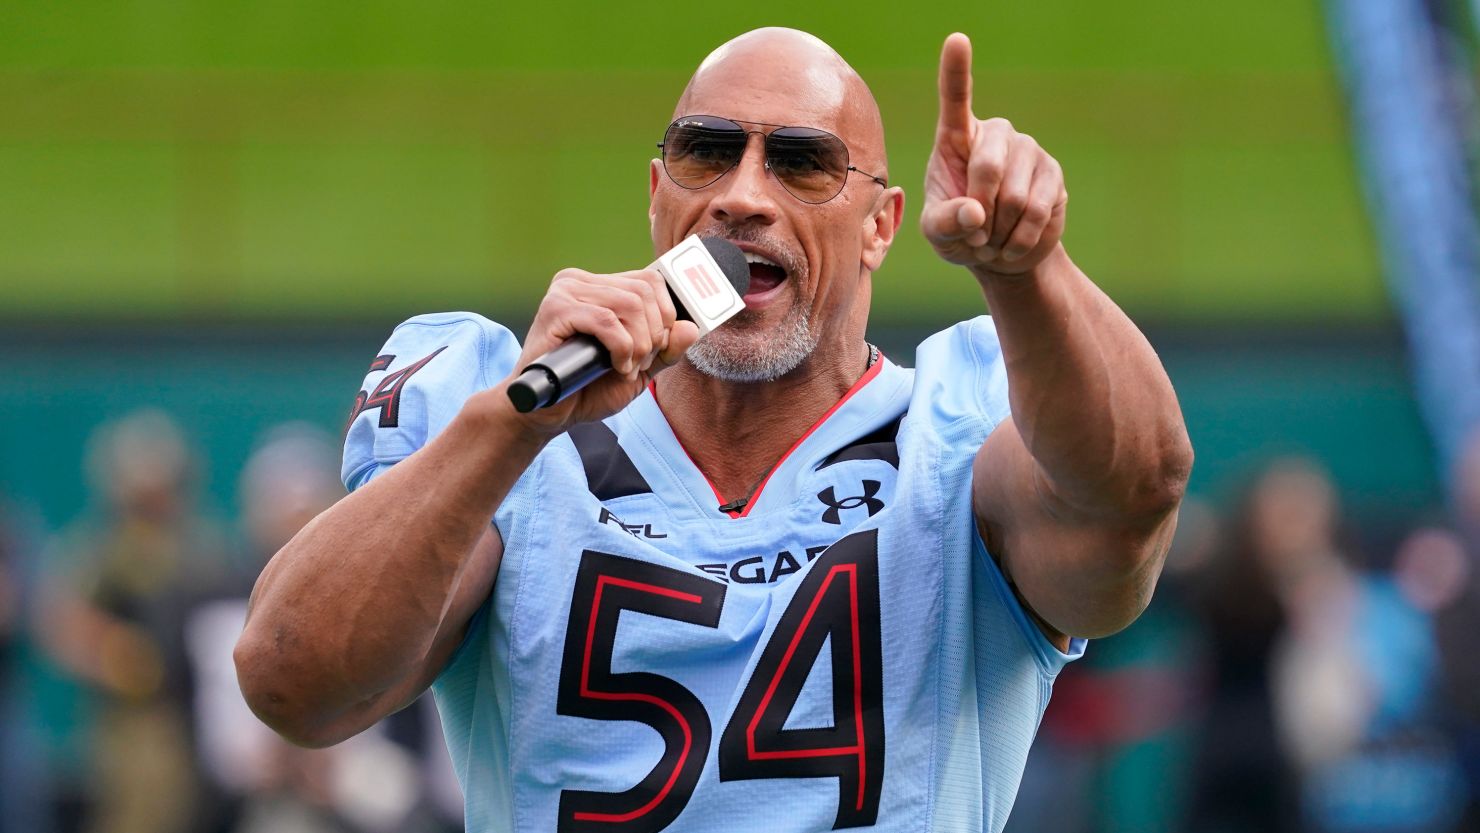 XFL owner Dwayne Johnson delivered a speech on the field before the season kicked off.